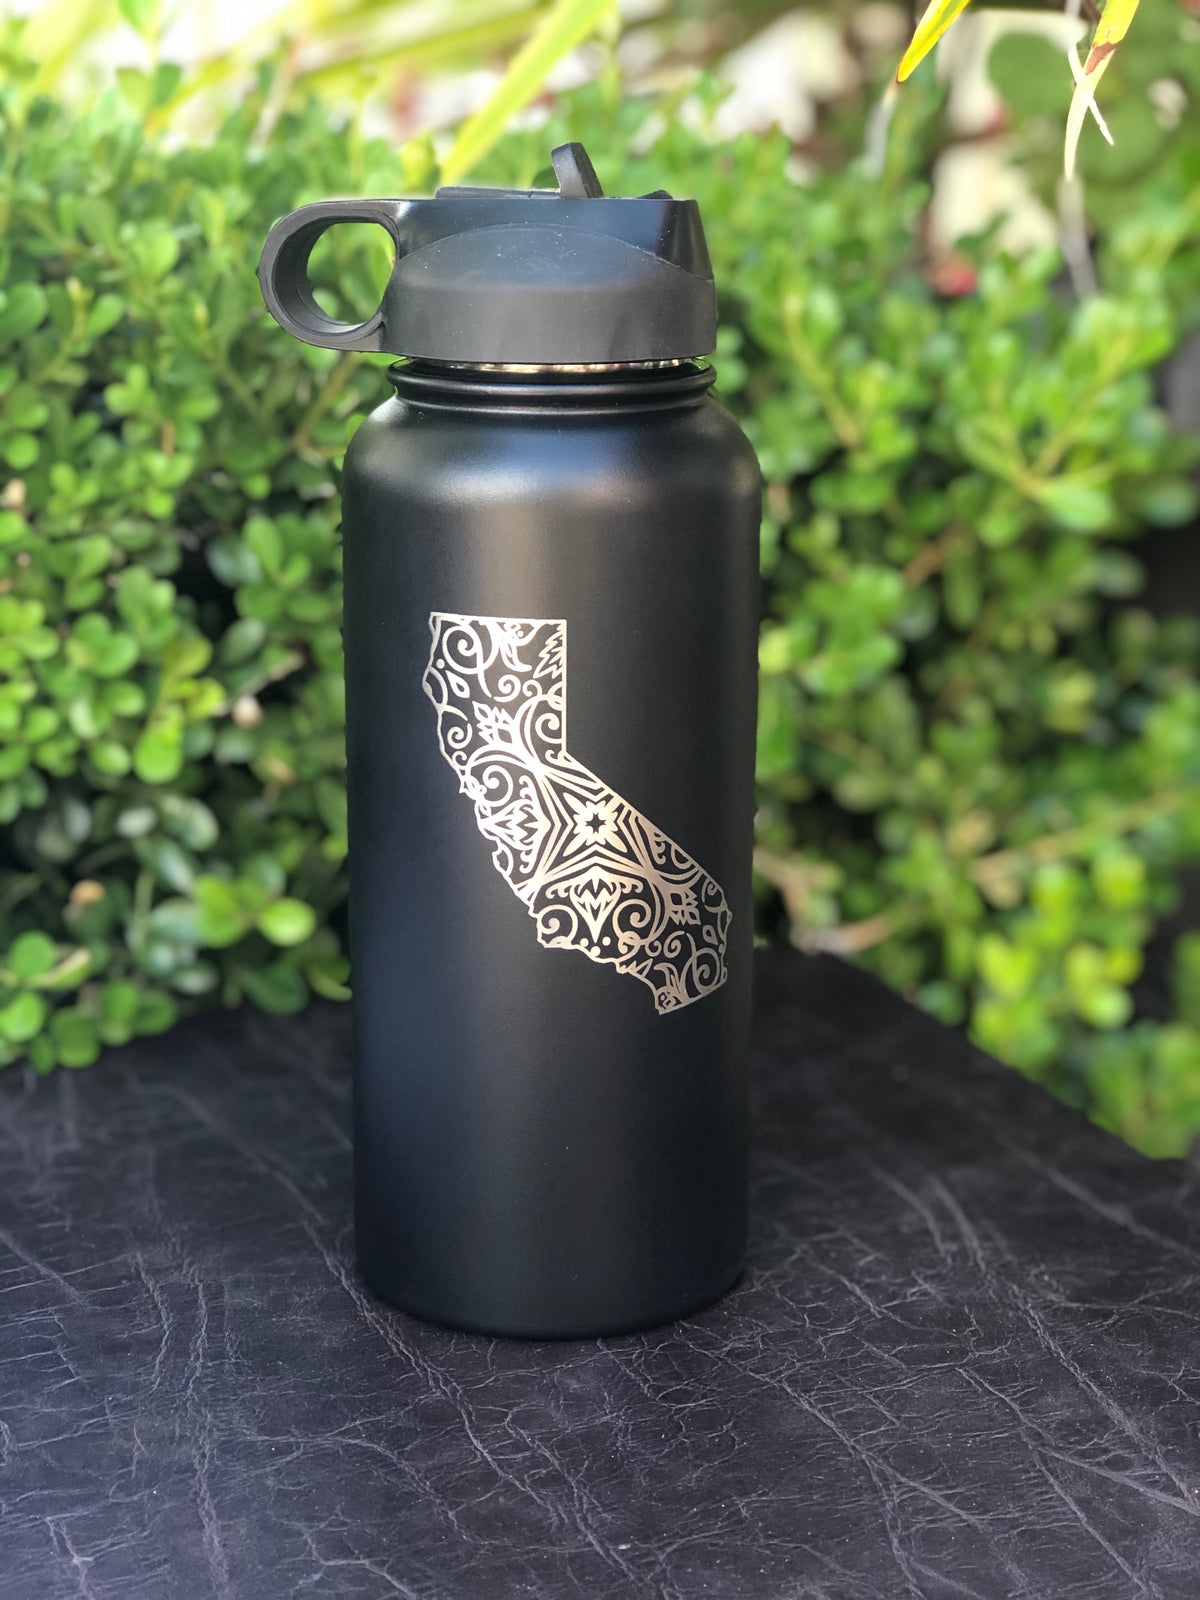 California Engraved State Water Bottle 32 Oz.